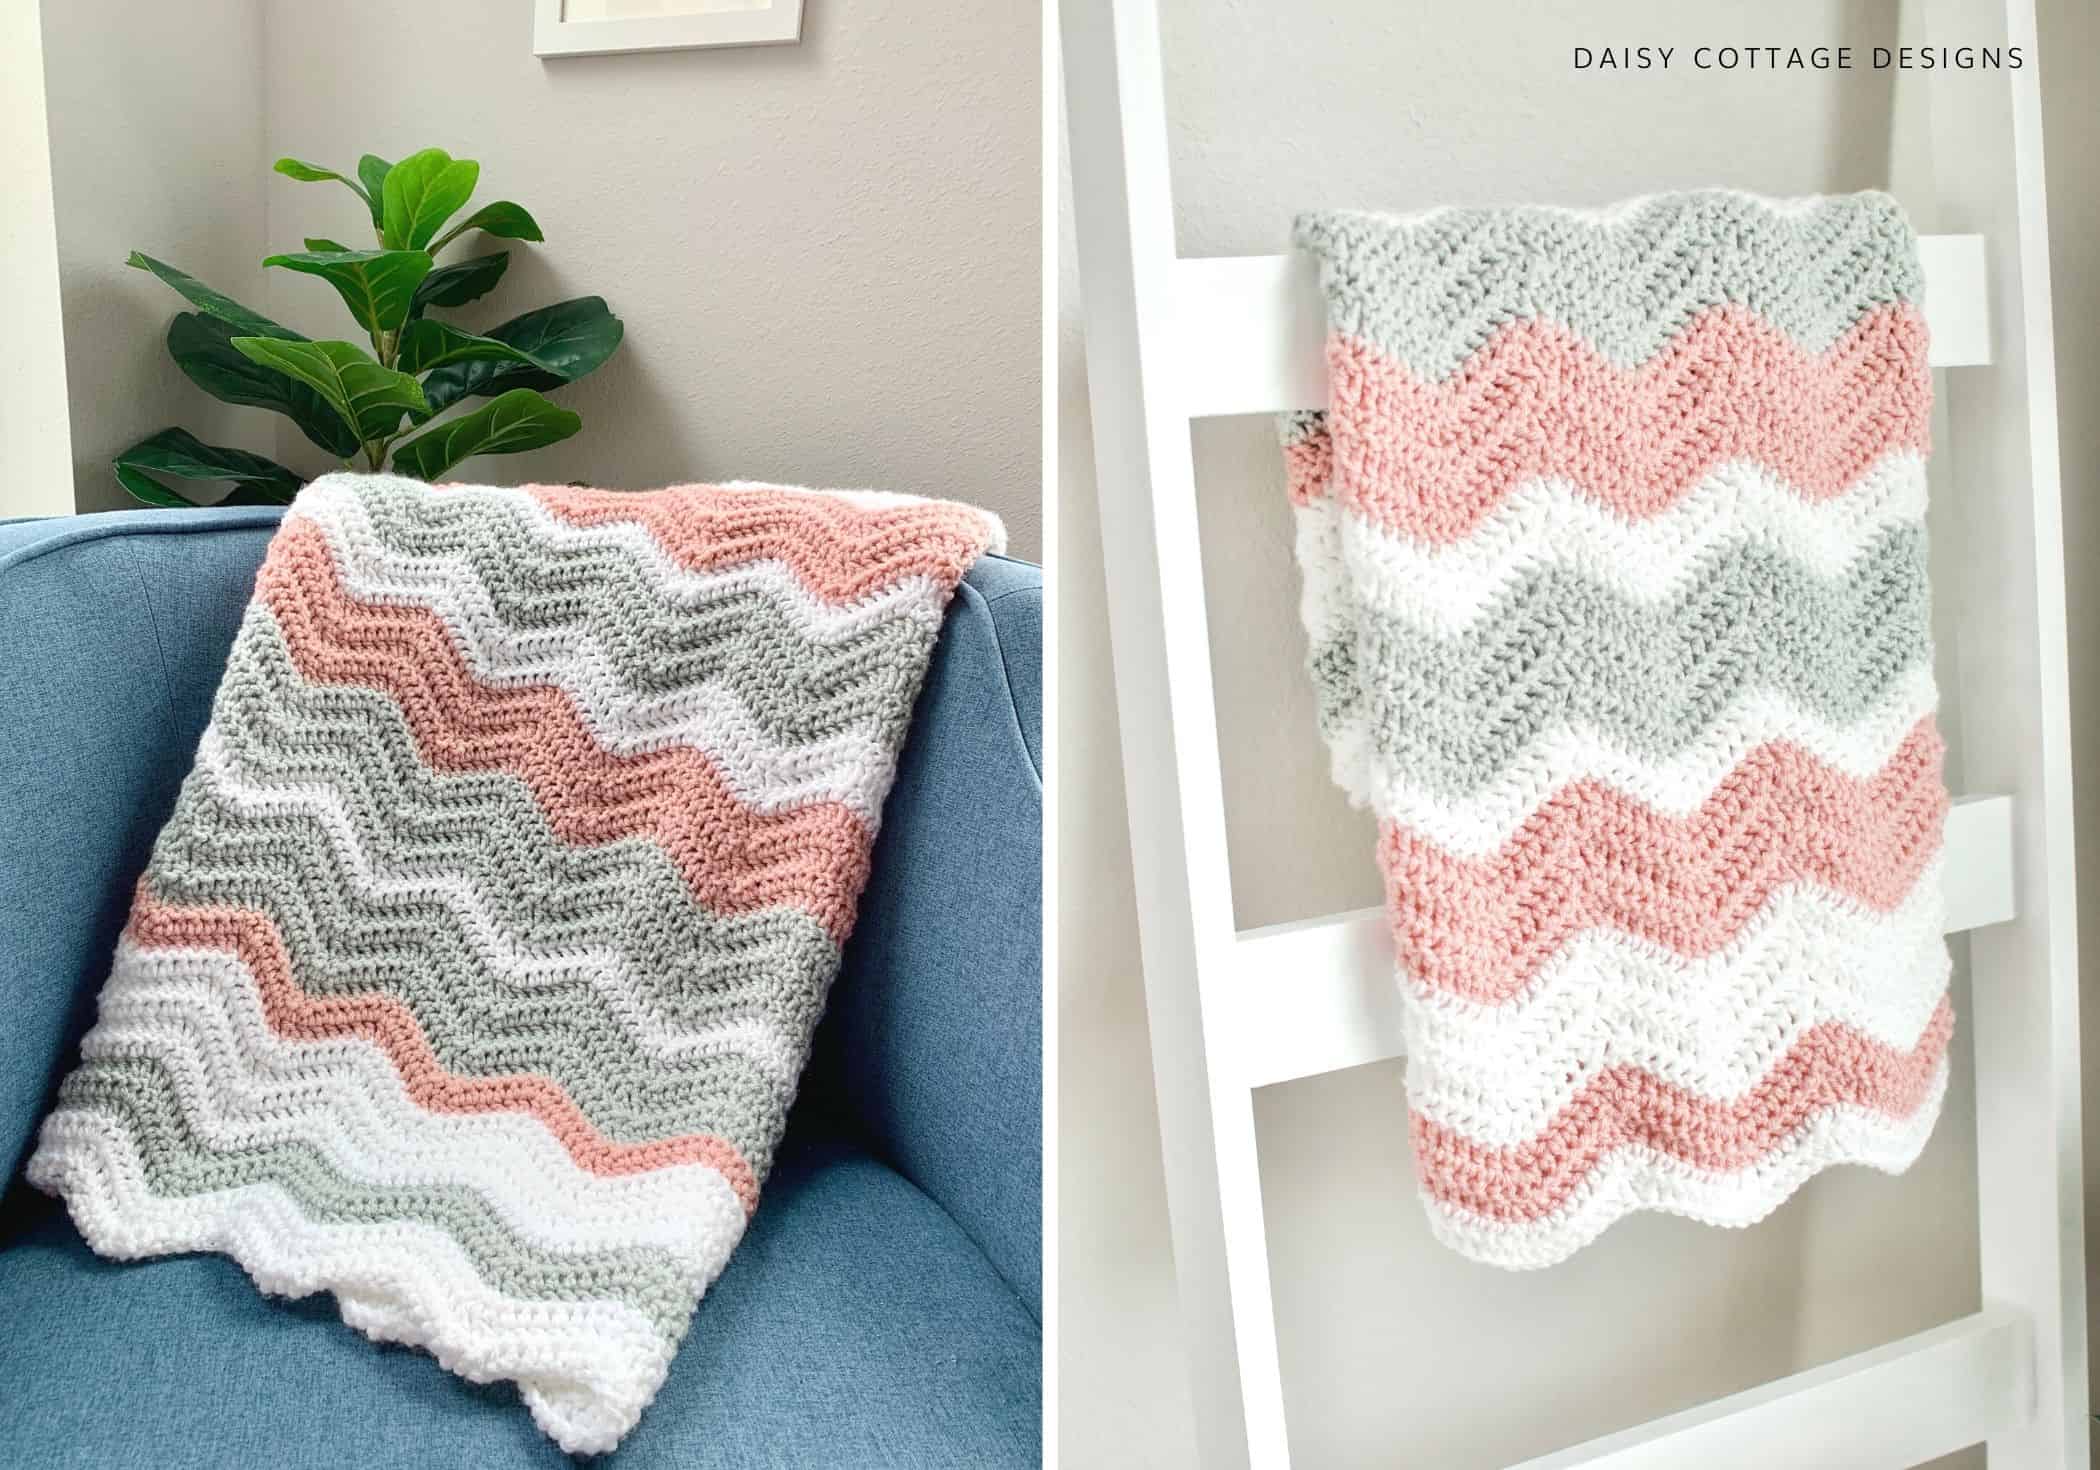 Daisy Cottage Designs Ripple Baby Blanket on chair